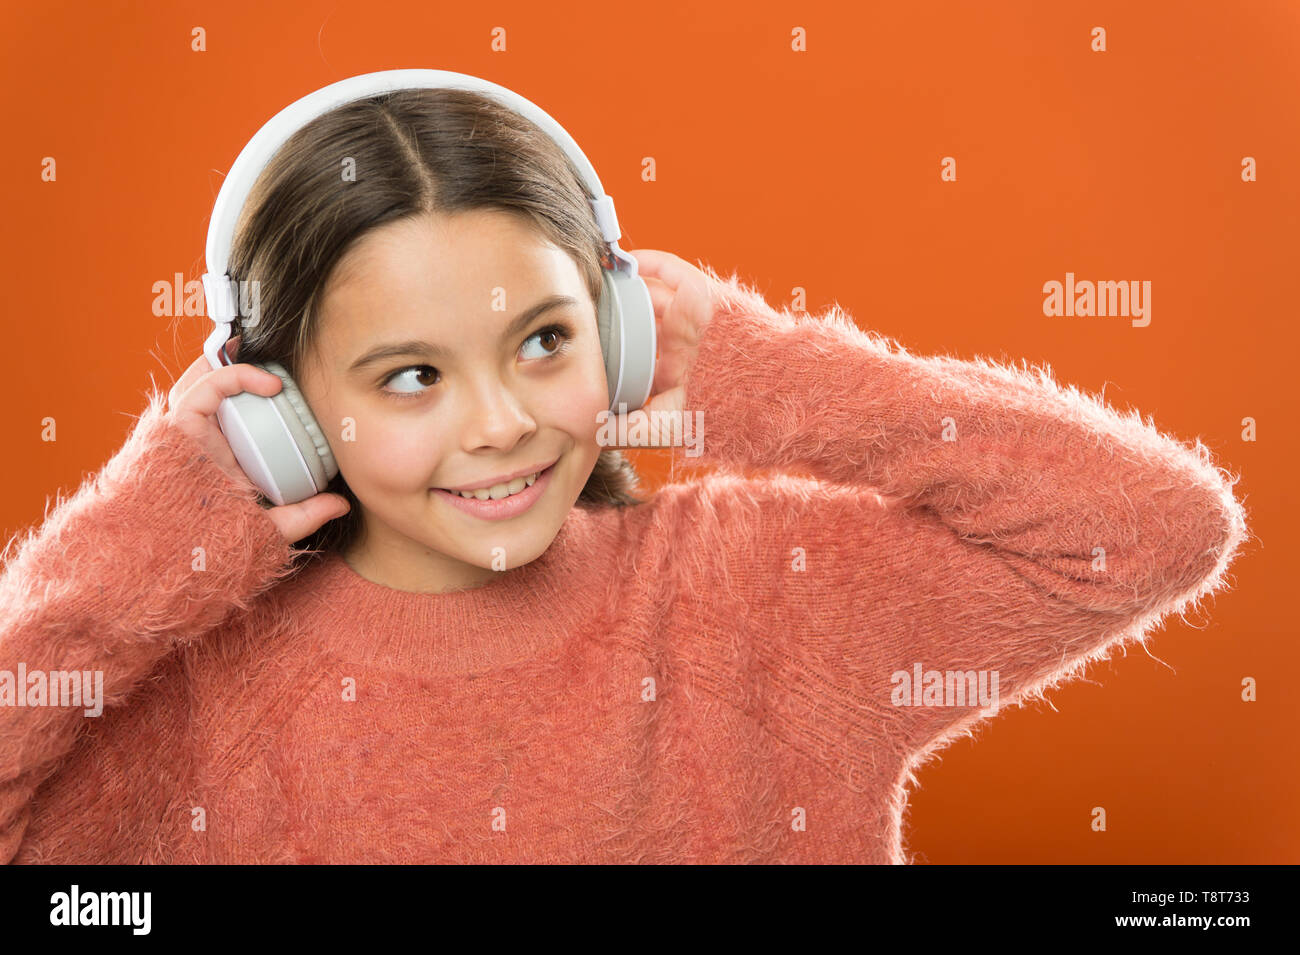 Modern technology is amazing. Small child wearing headphones with bluetooth technology. Little girl listening to music with wireless earphones. Stereo sound technology. Technology and music. Stock Photo